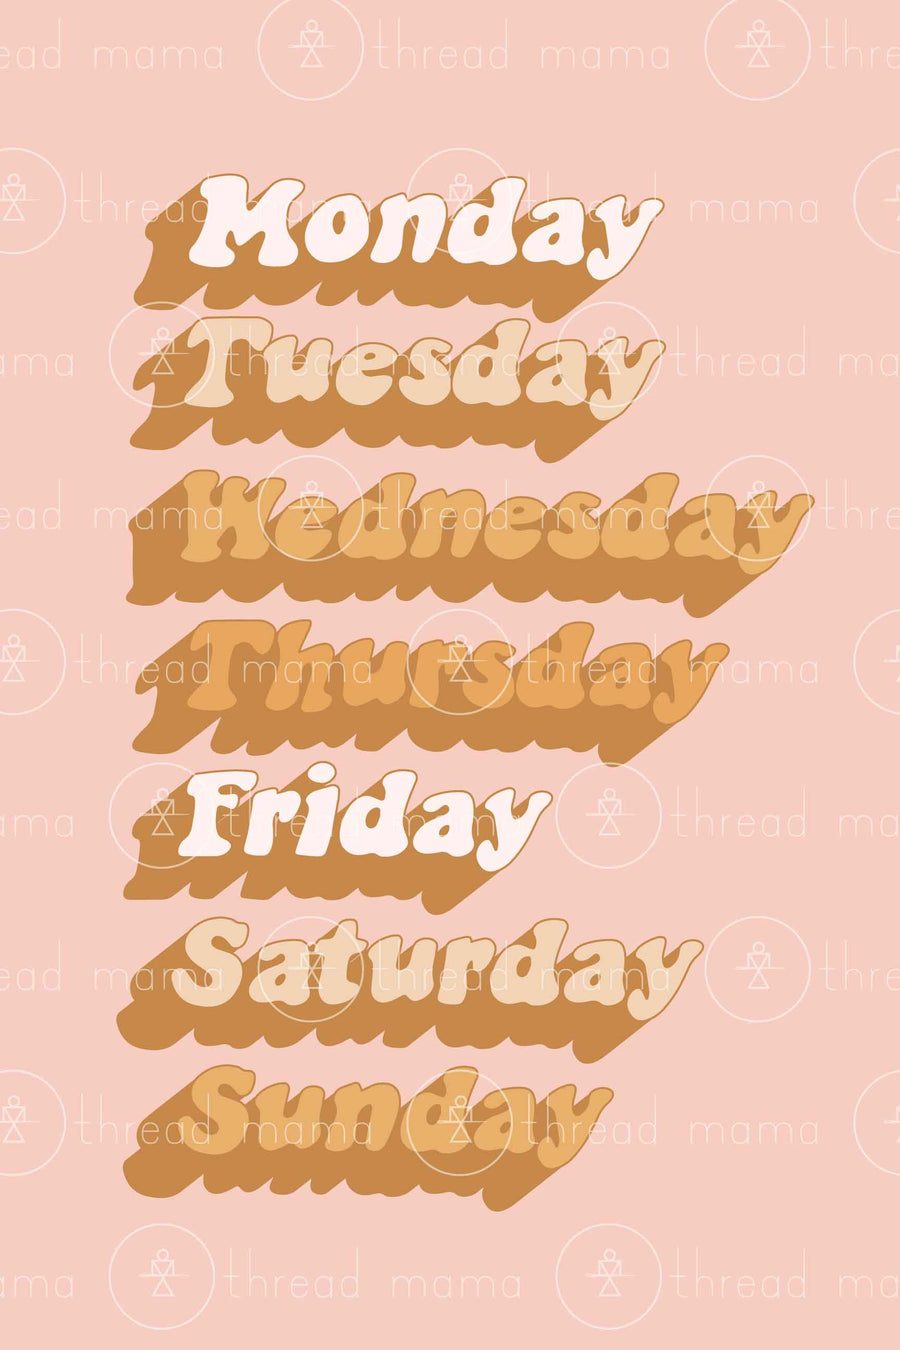 Days of The Week (Printable Poster)